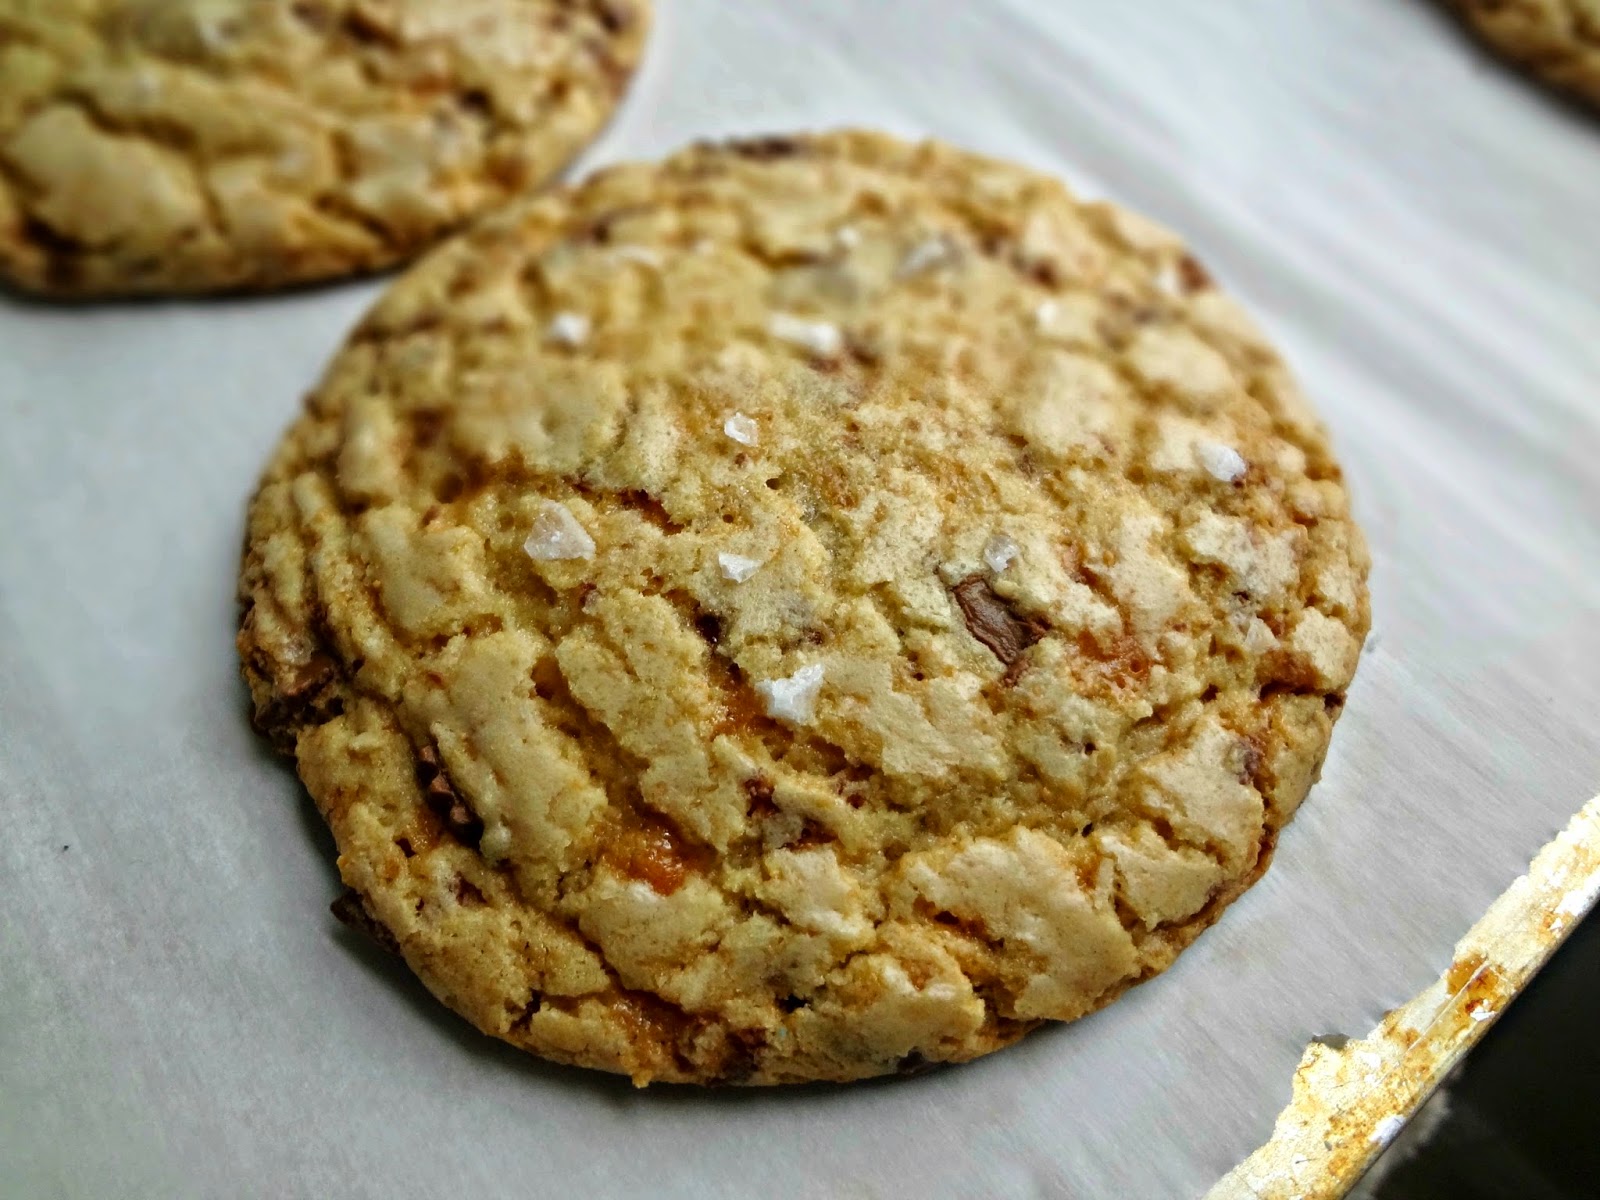 Browned Butter Peanut Butter Cup Crunch Cookies with Sea Salt